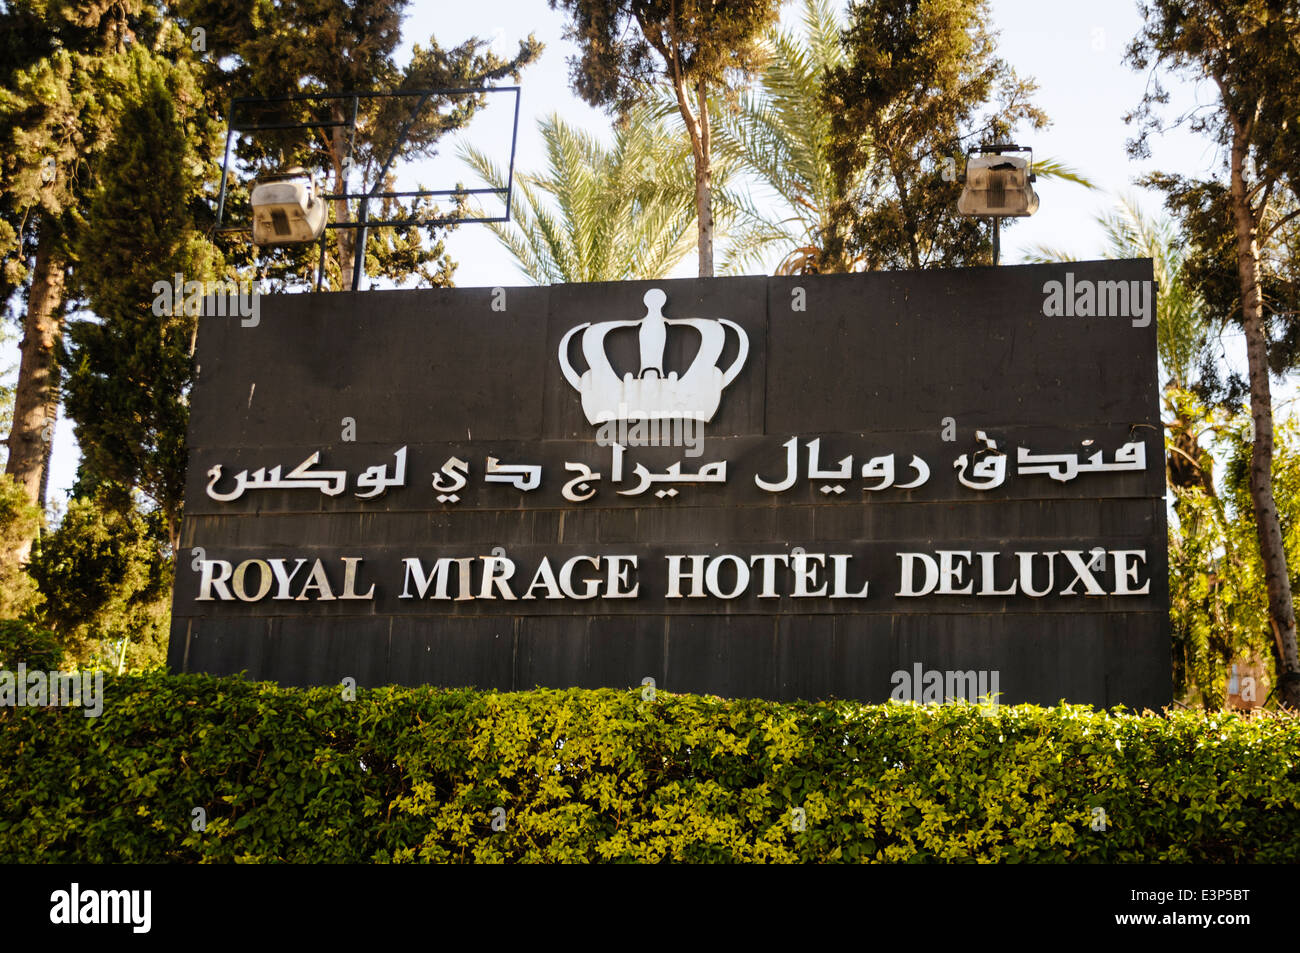 Sign at the Royal Mirage Hotel Deluxe, Marrakech, Morocco Stock Photo